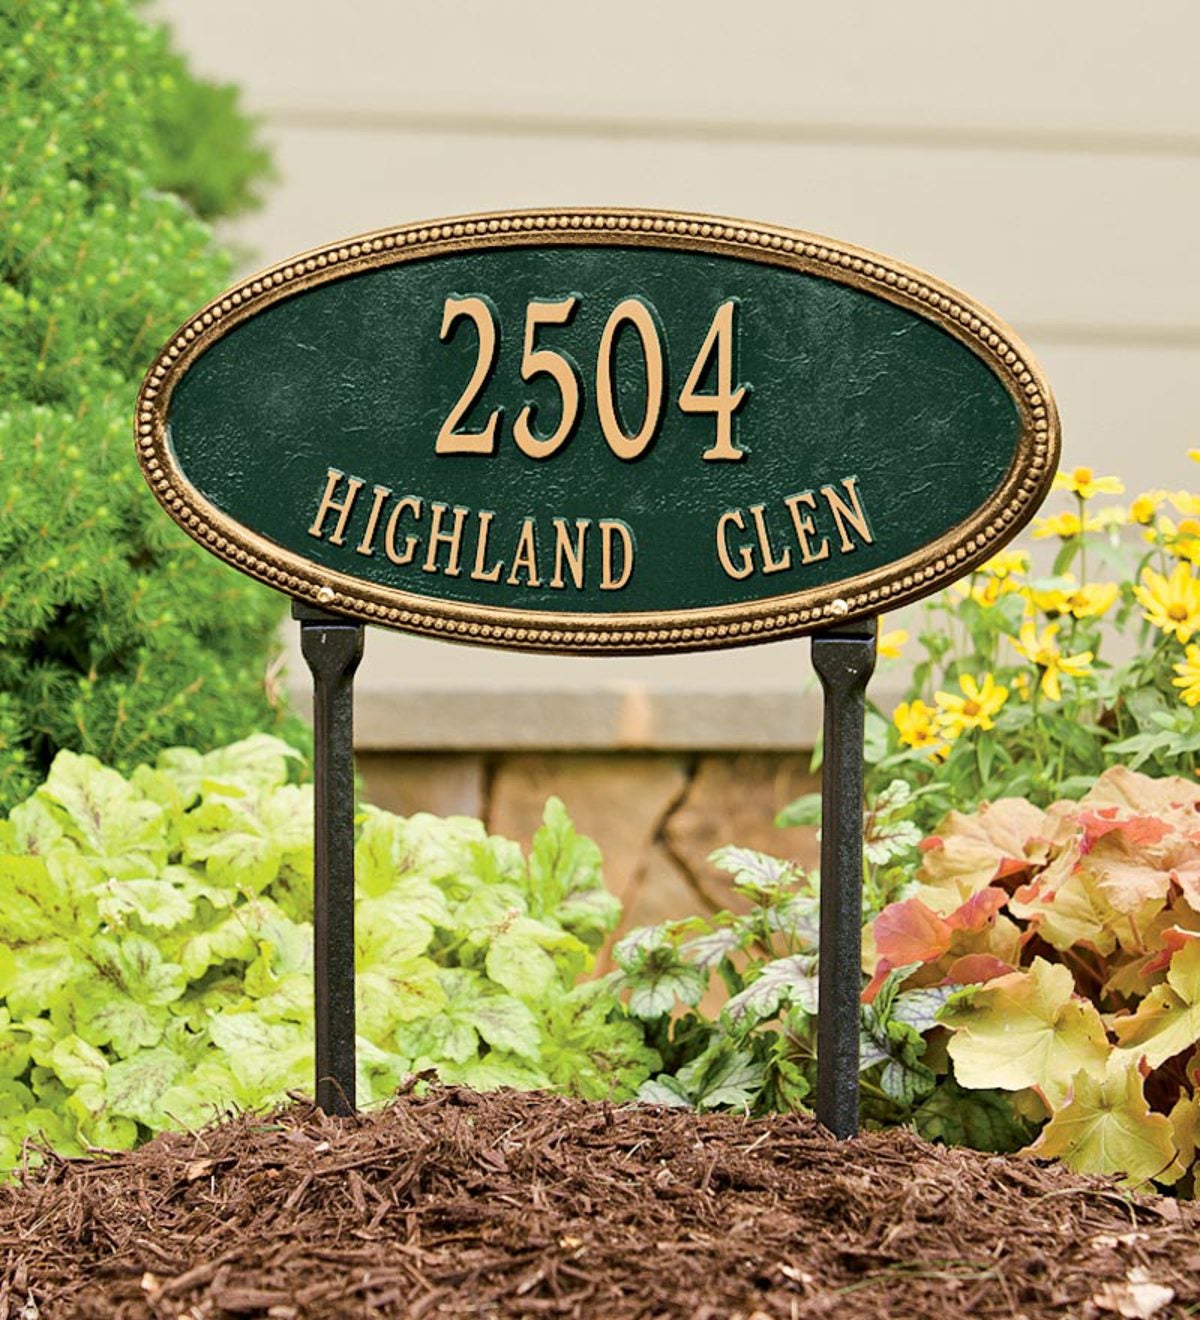 Beaded Oval Lawn Personalized Address Plaque